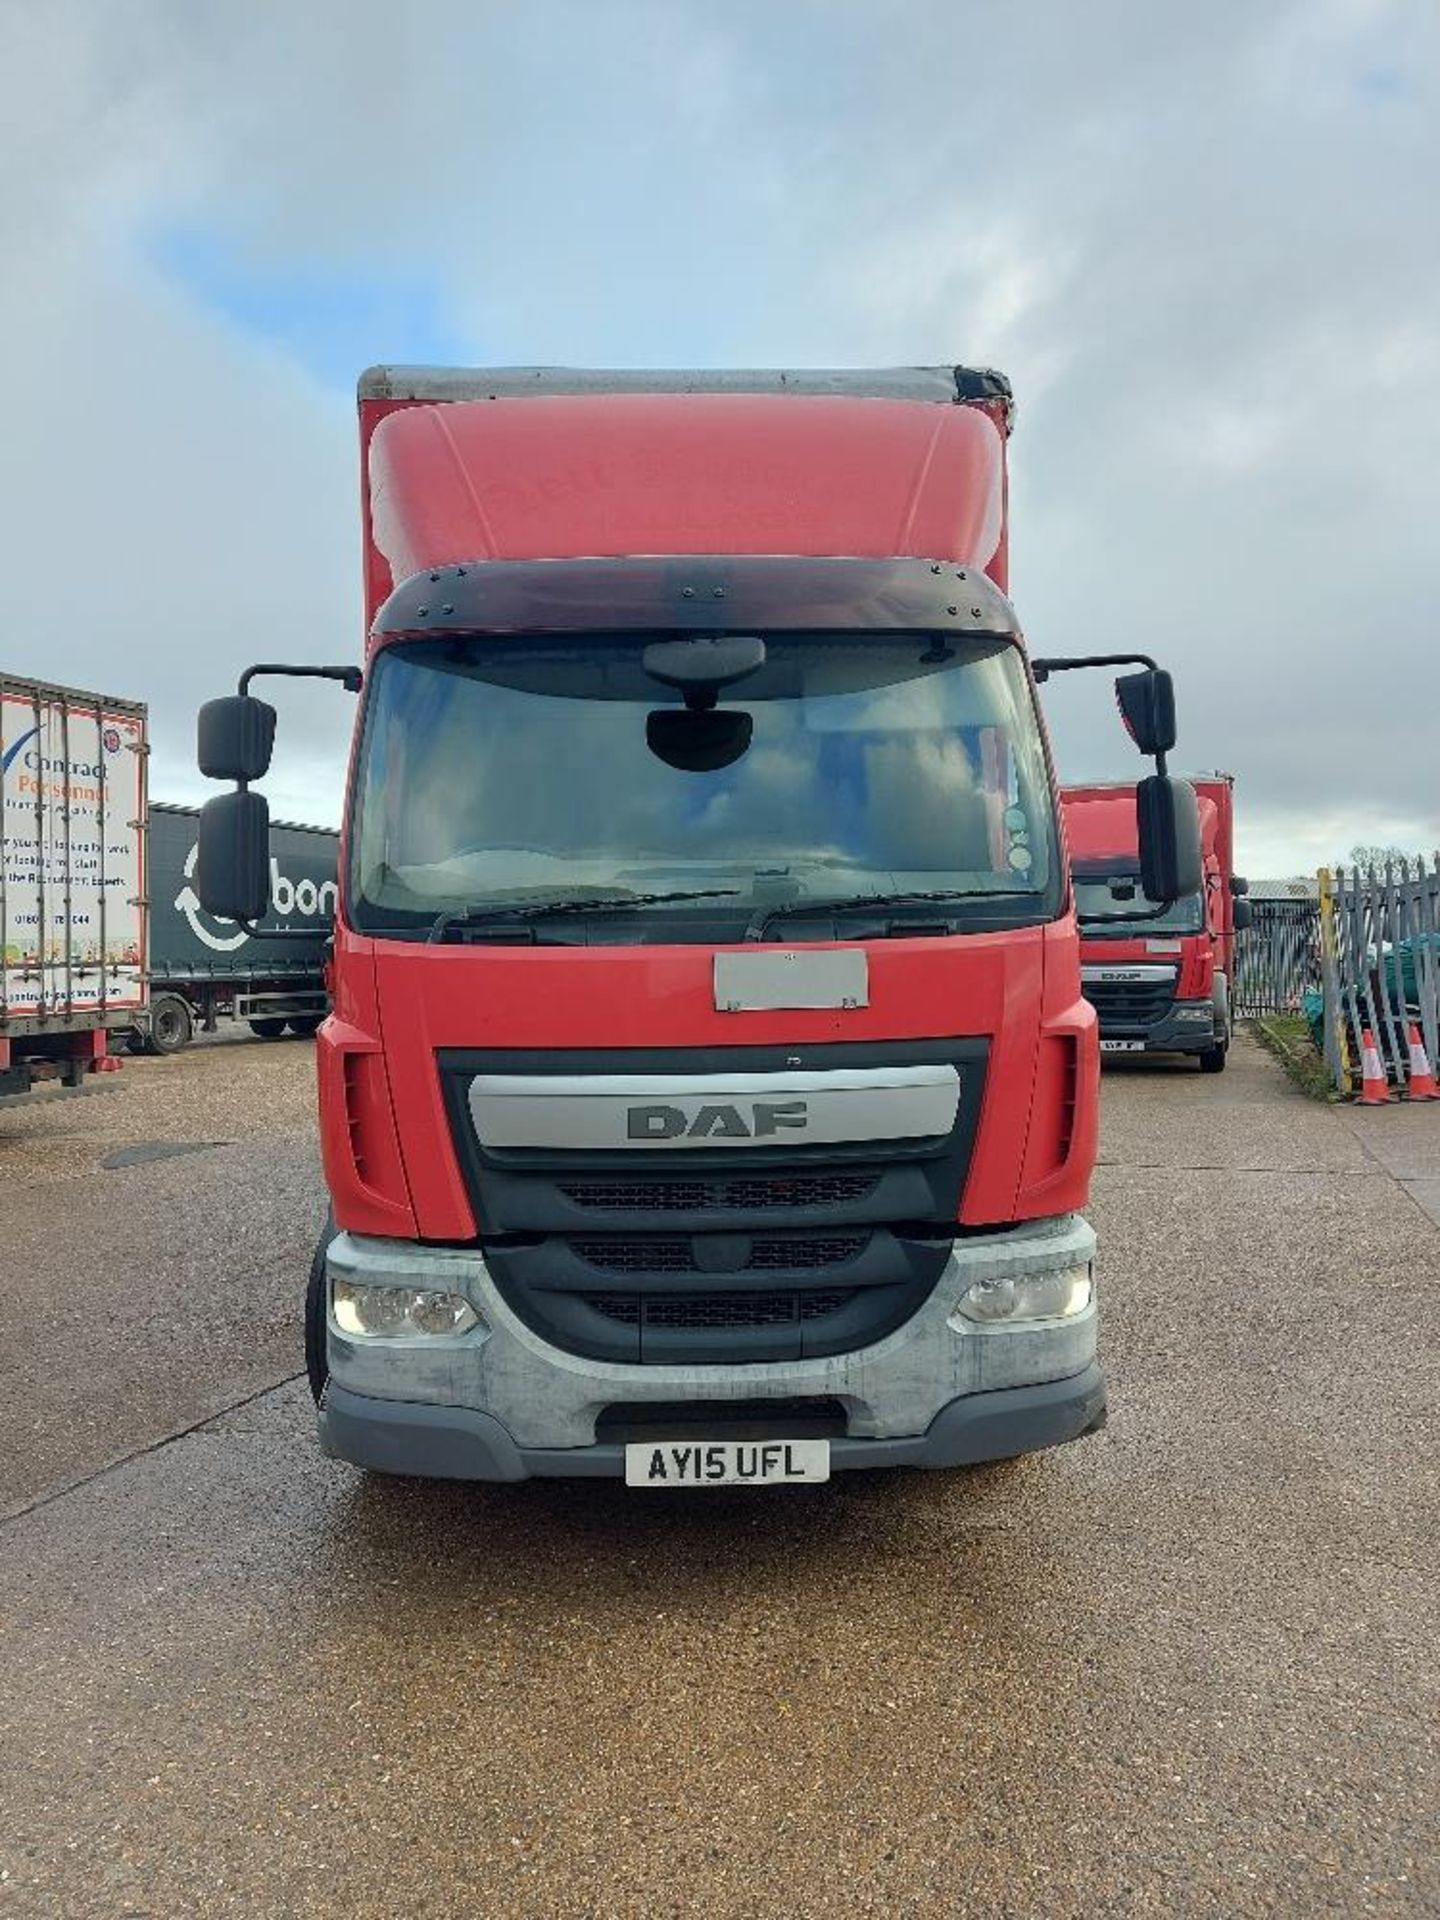 DAF LF 250 4x2 Rigid 18T Curtain Side Lorry with Tail Lift - Image 3 of 11